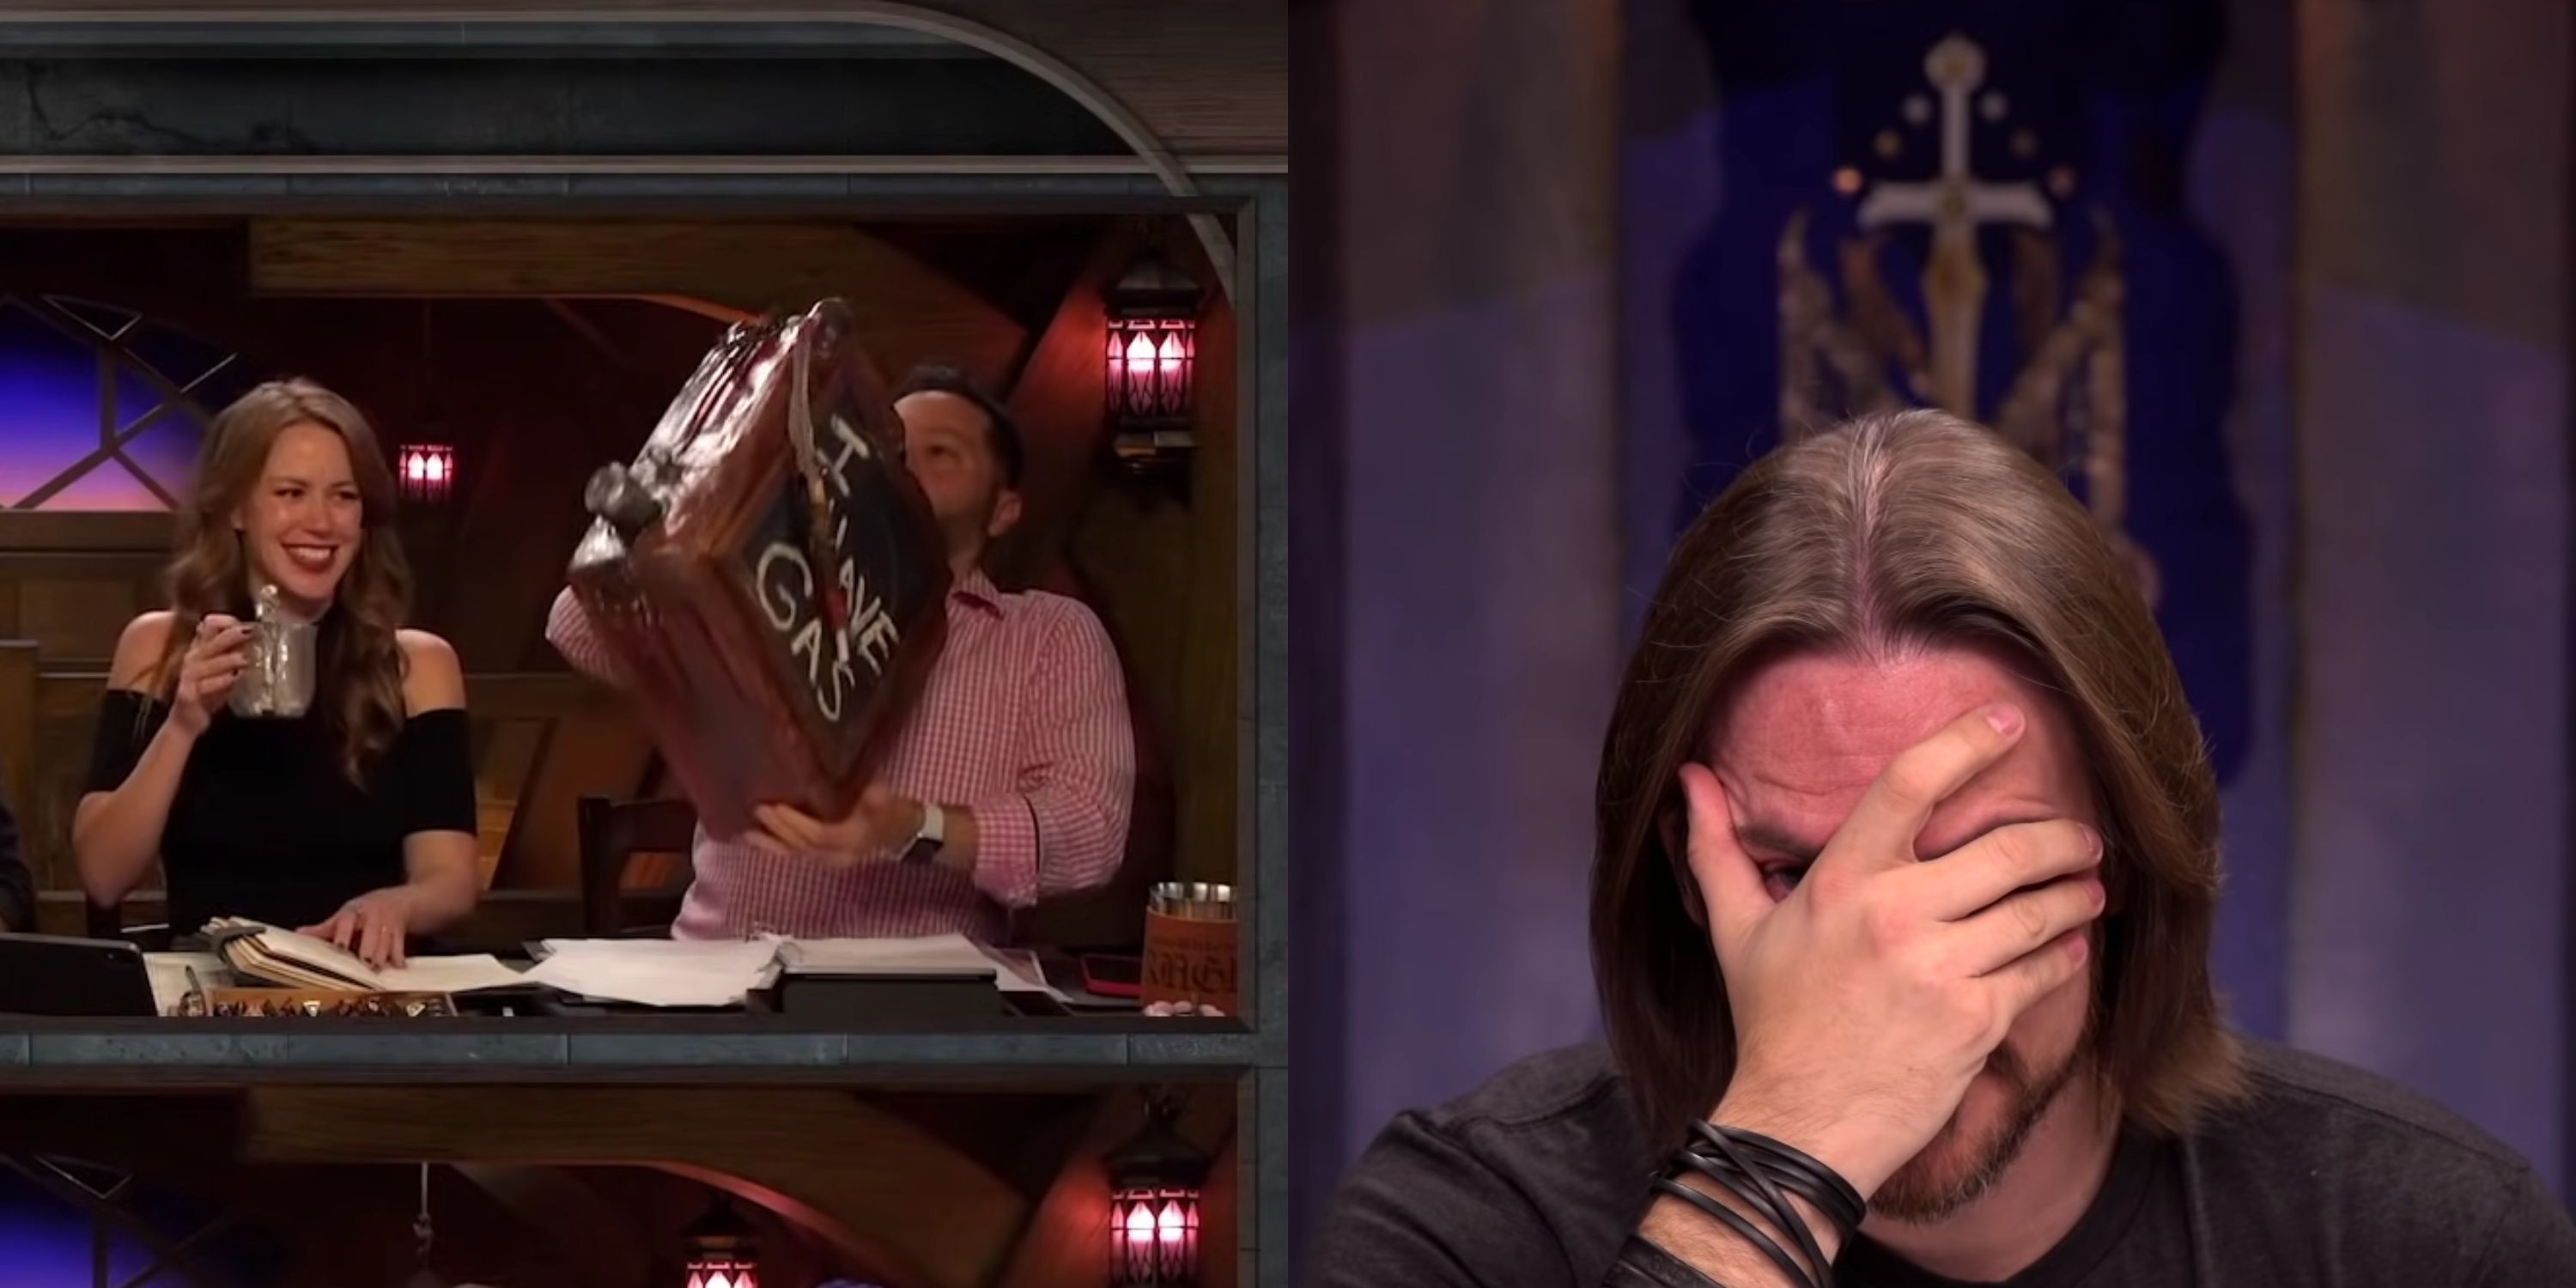 Featured image Sam drinks from a gas can flask and Matt mercer facepalms on Critical Role